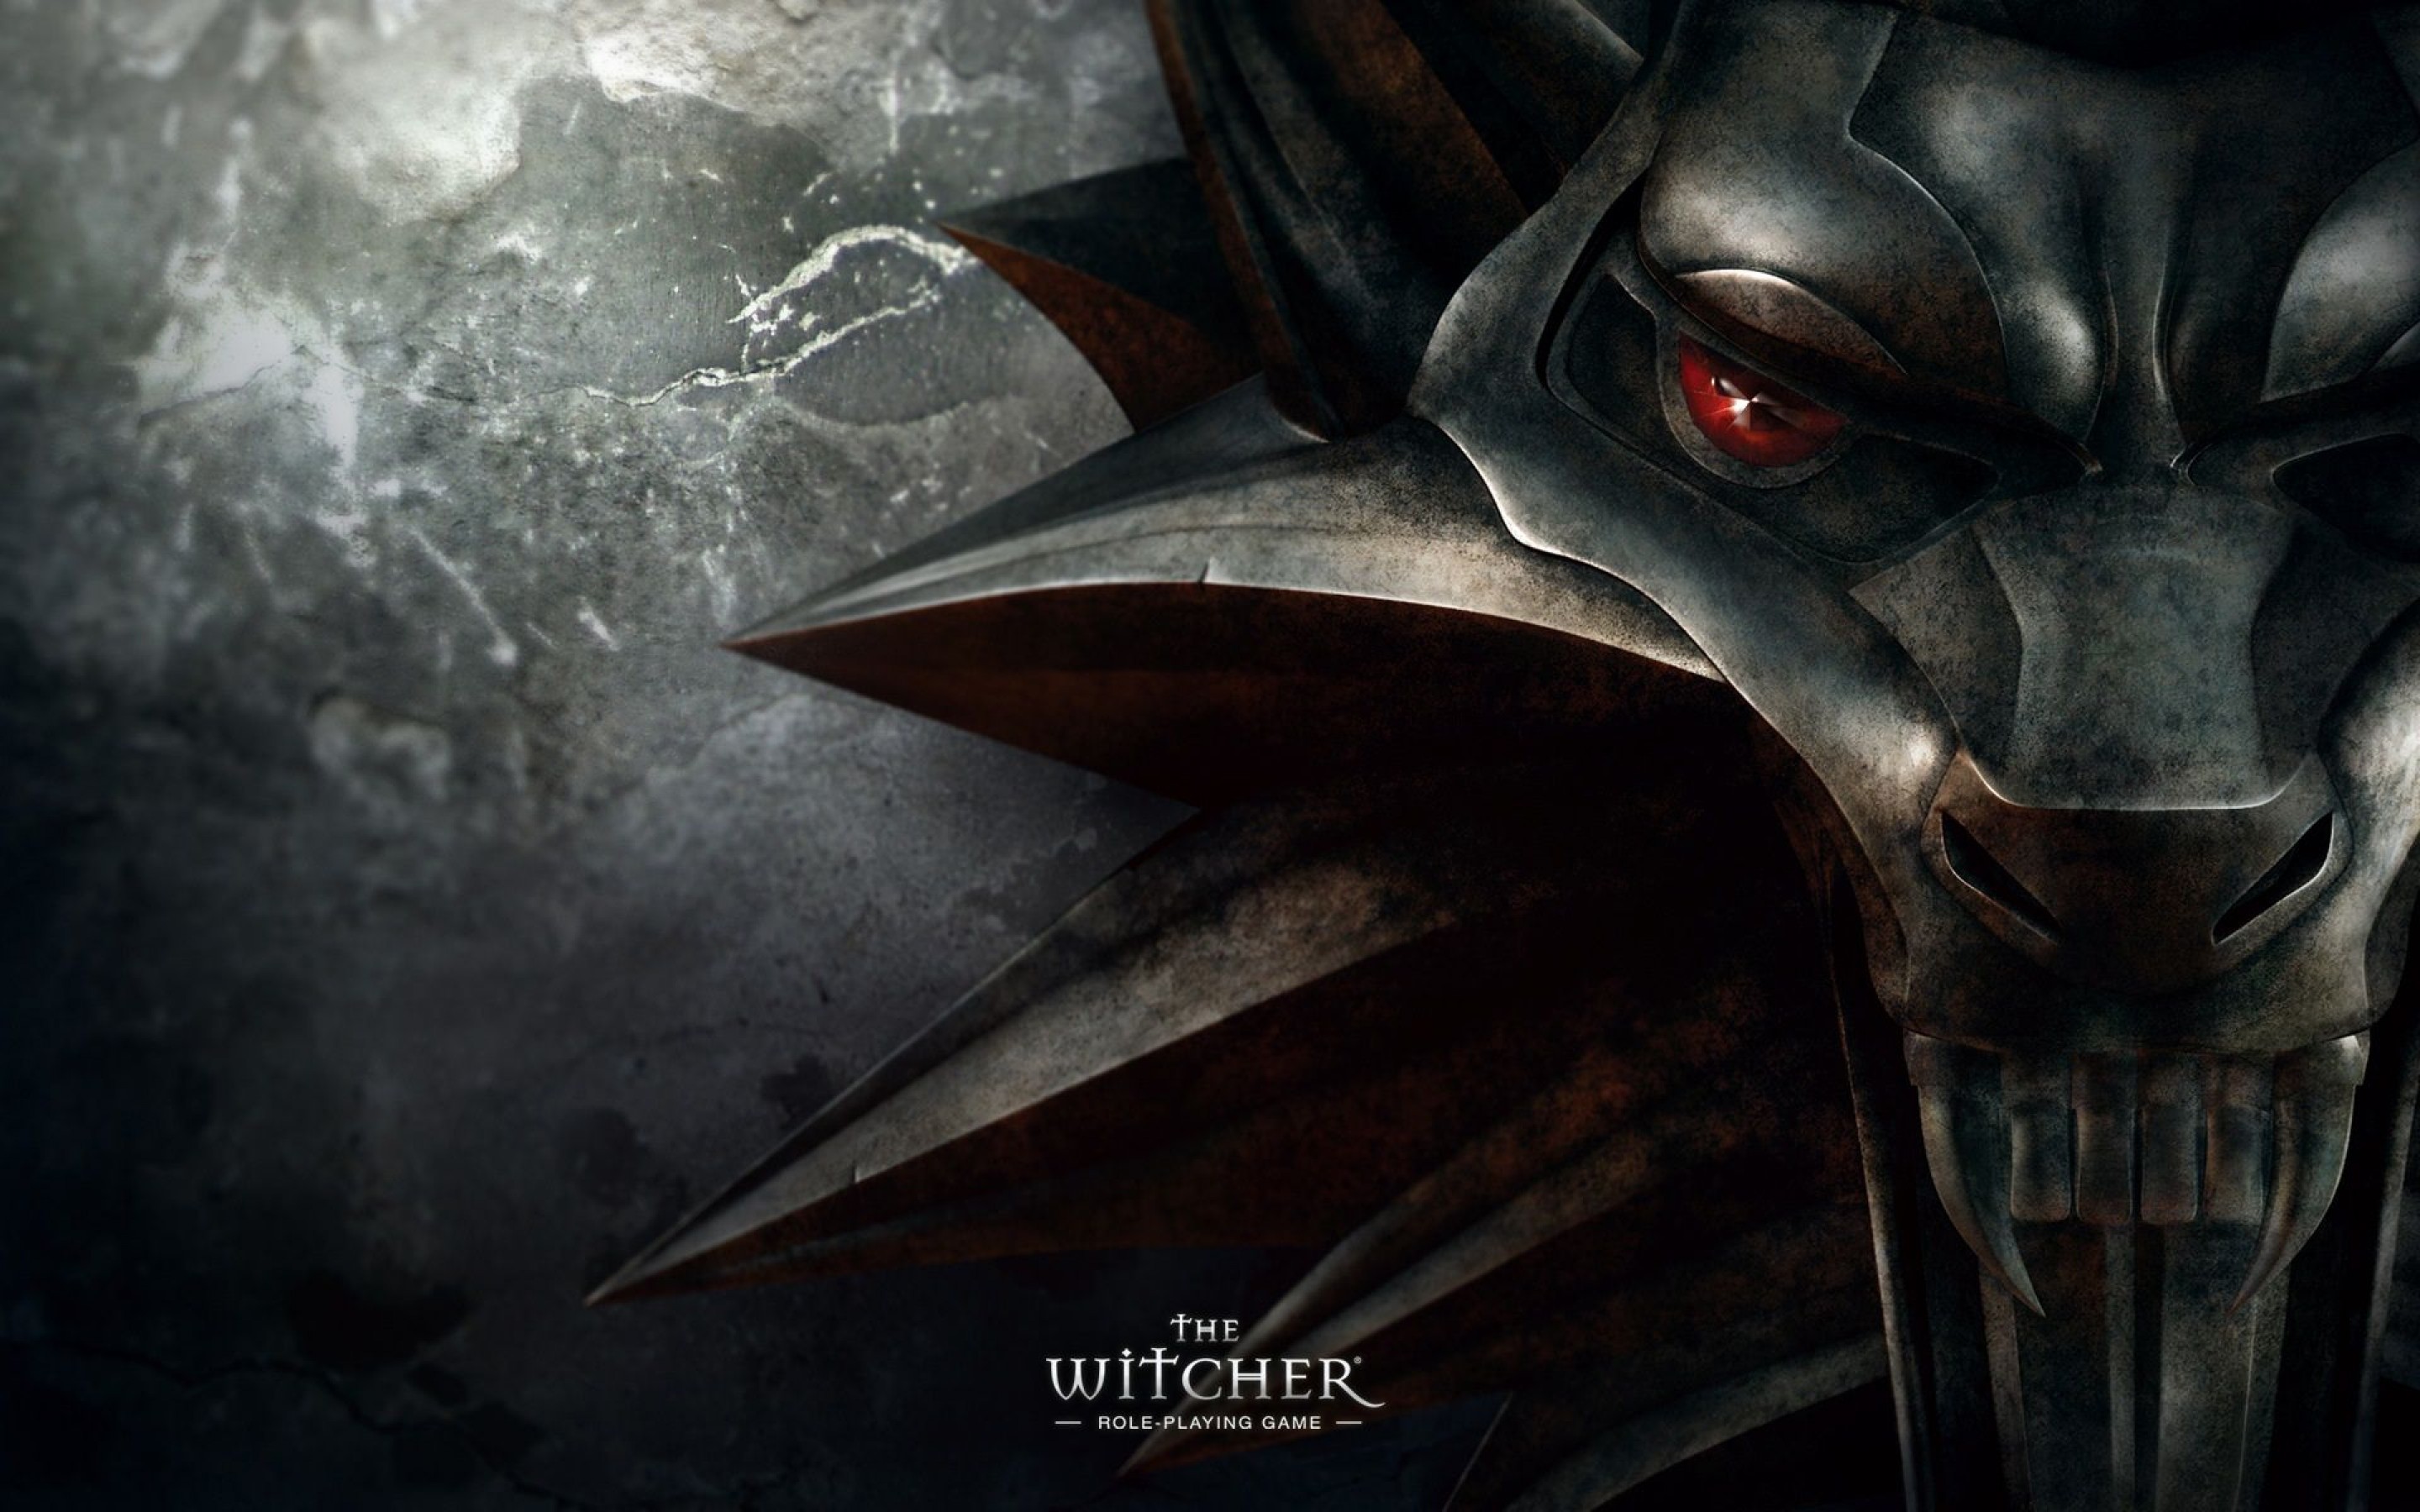 The Witcher 3 - Wallpaper, High Definition, High Quality, Widescreen